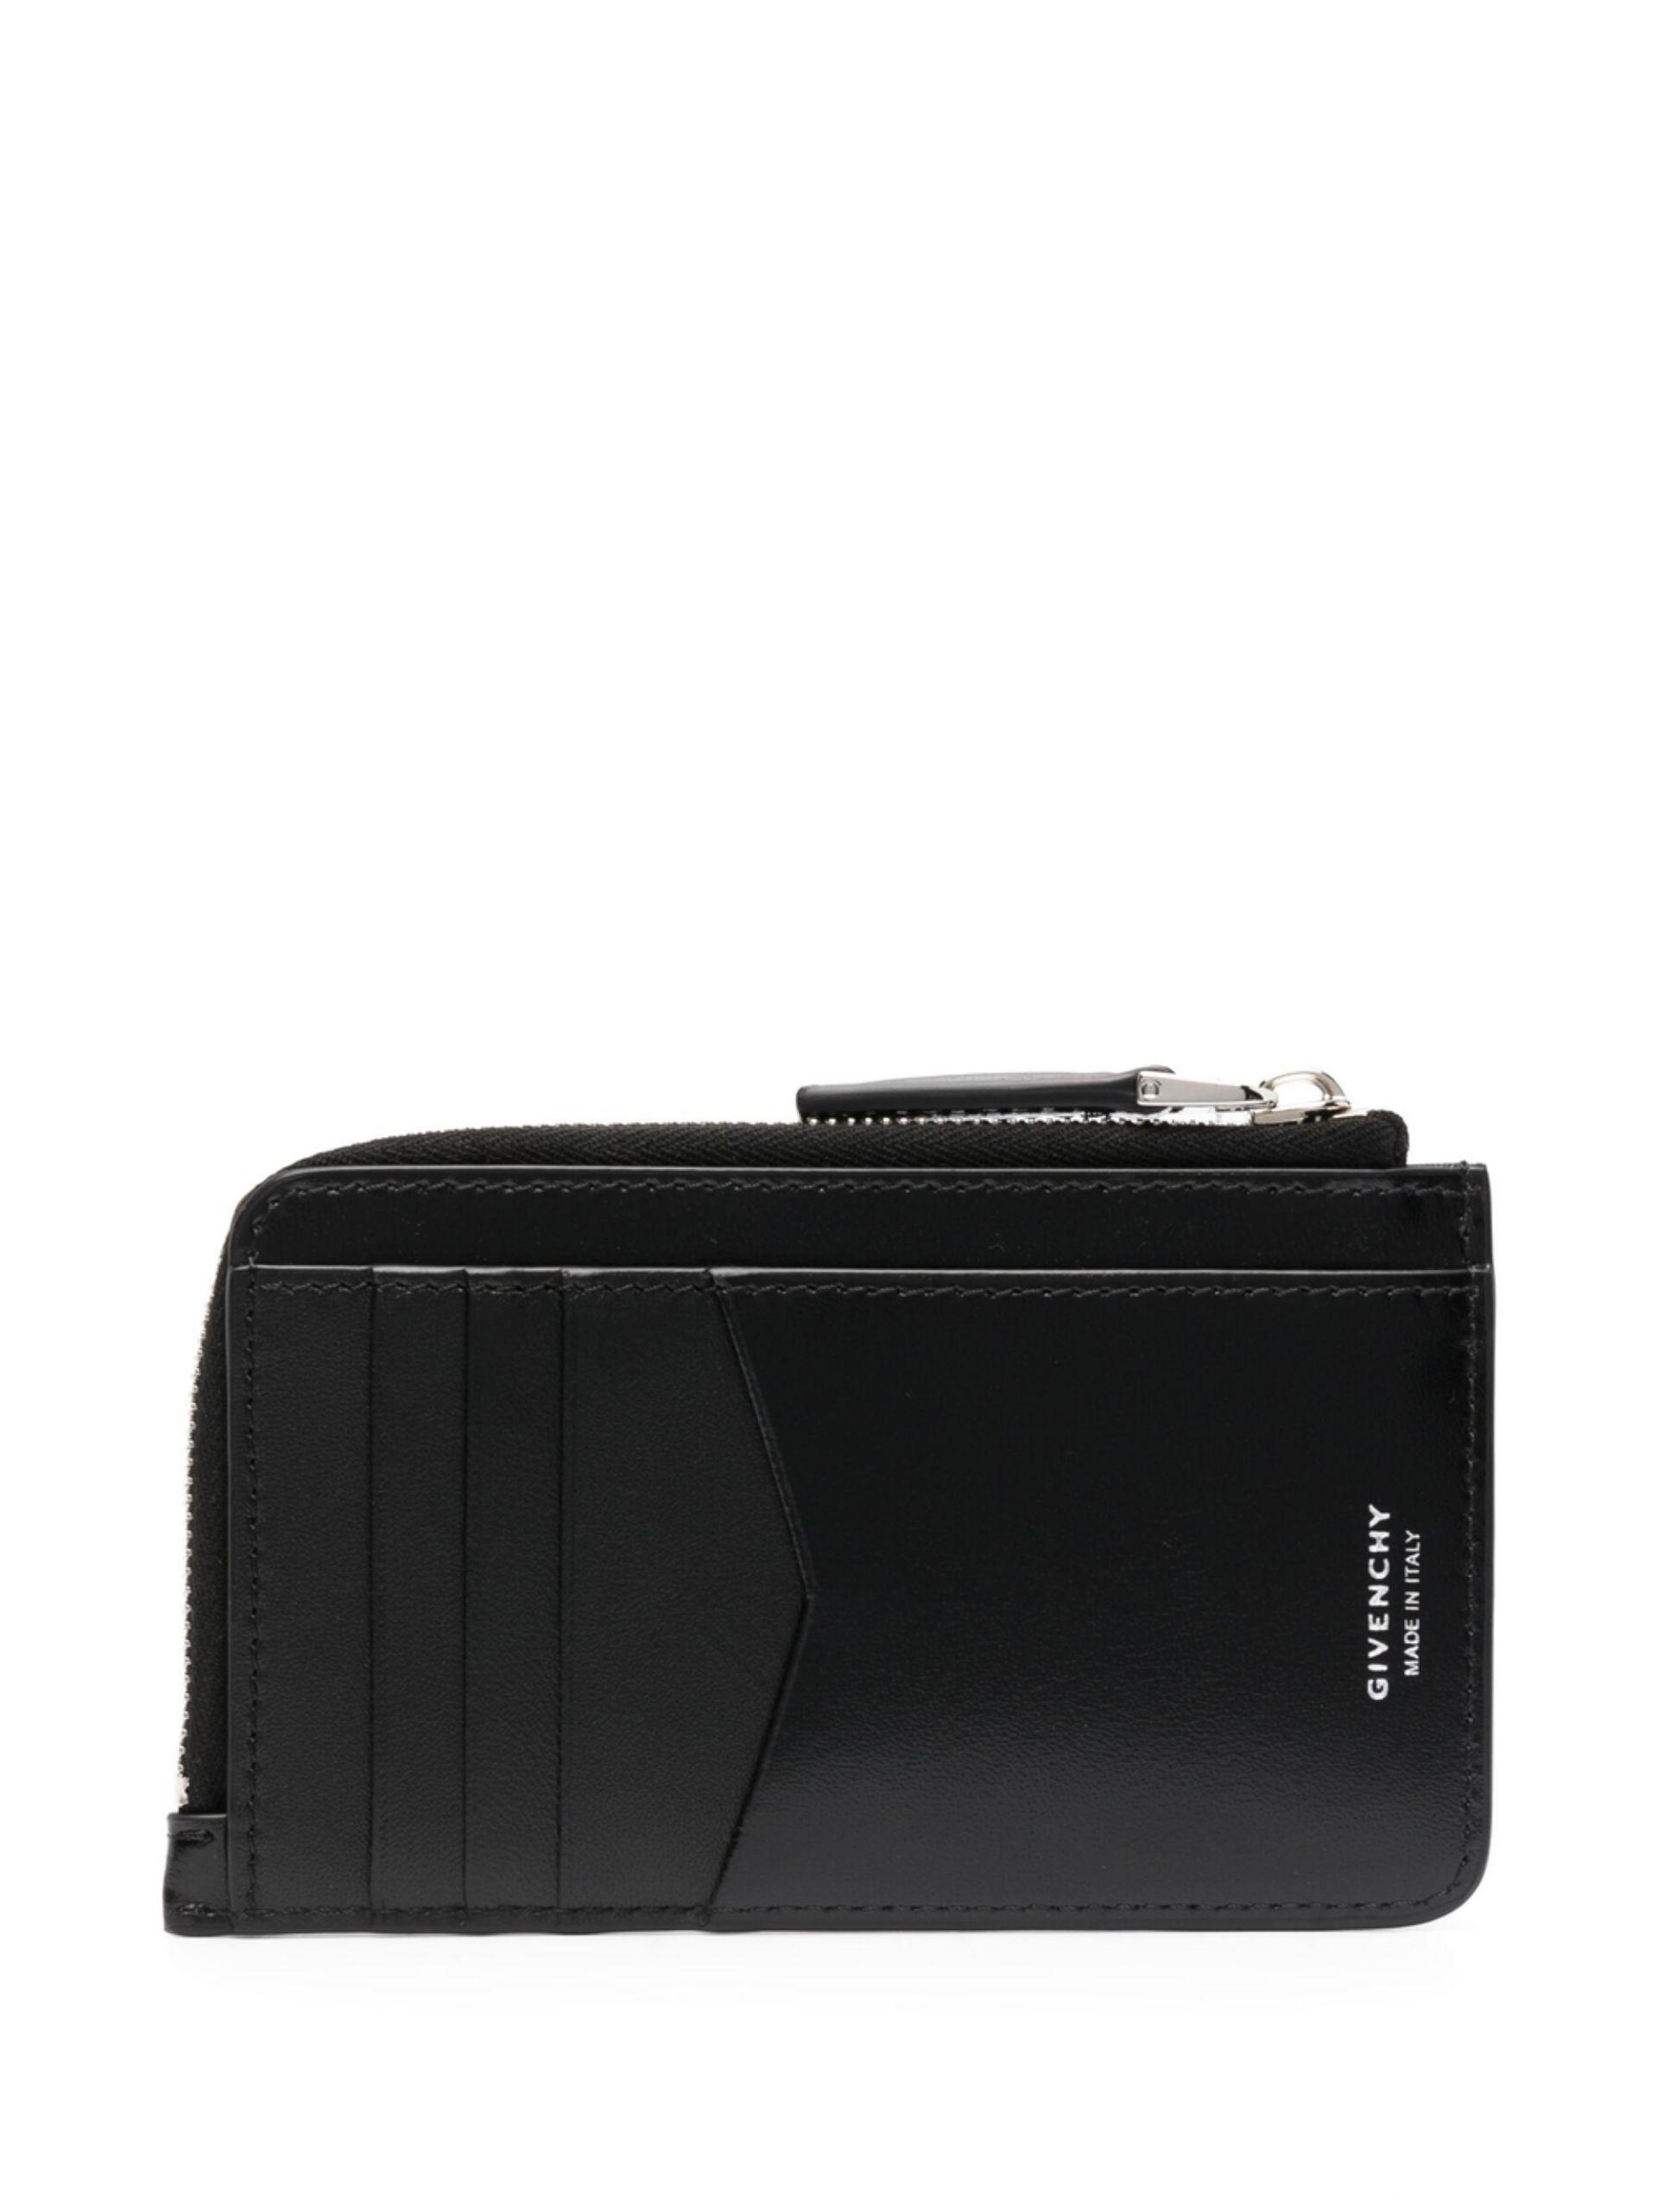 Givenchy Antigona Zipped Leather Wallet in Black | Lyst